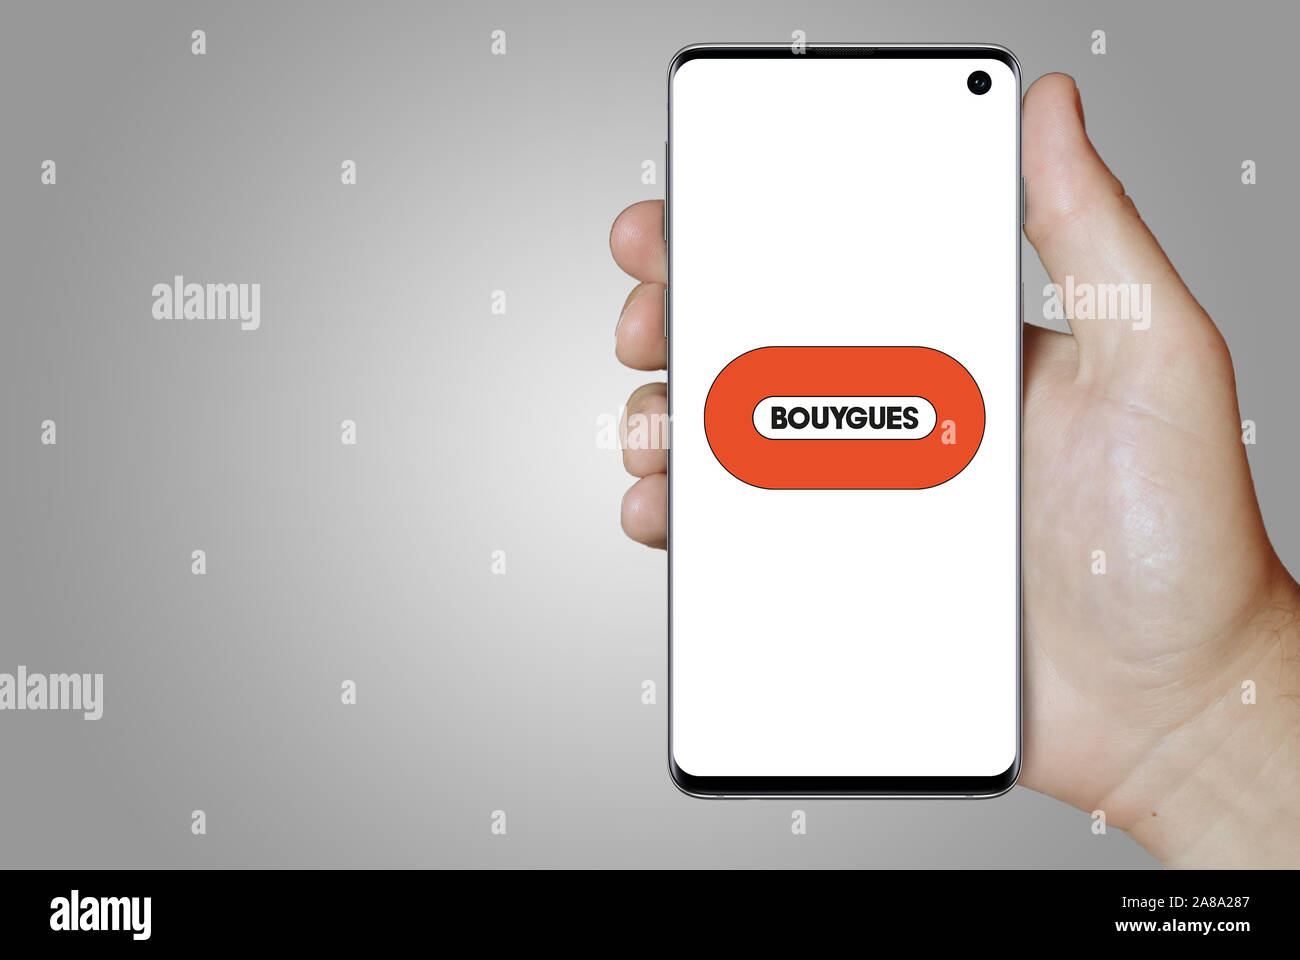 Logo of public company Bouygues displayed on a smartphone. Grey background. Credit: PIXDUCE Stock Photo